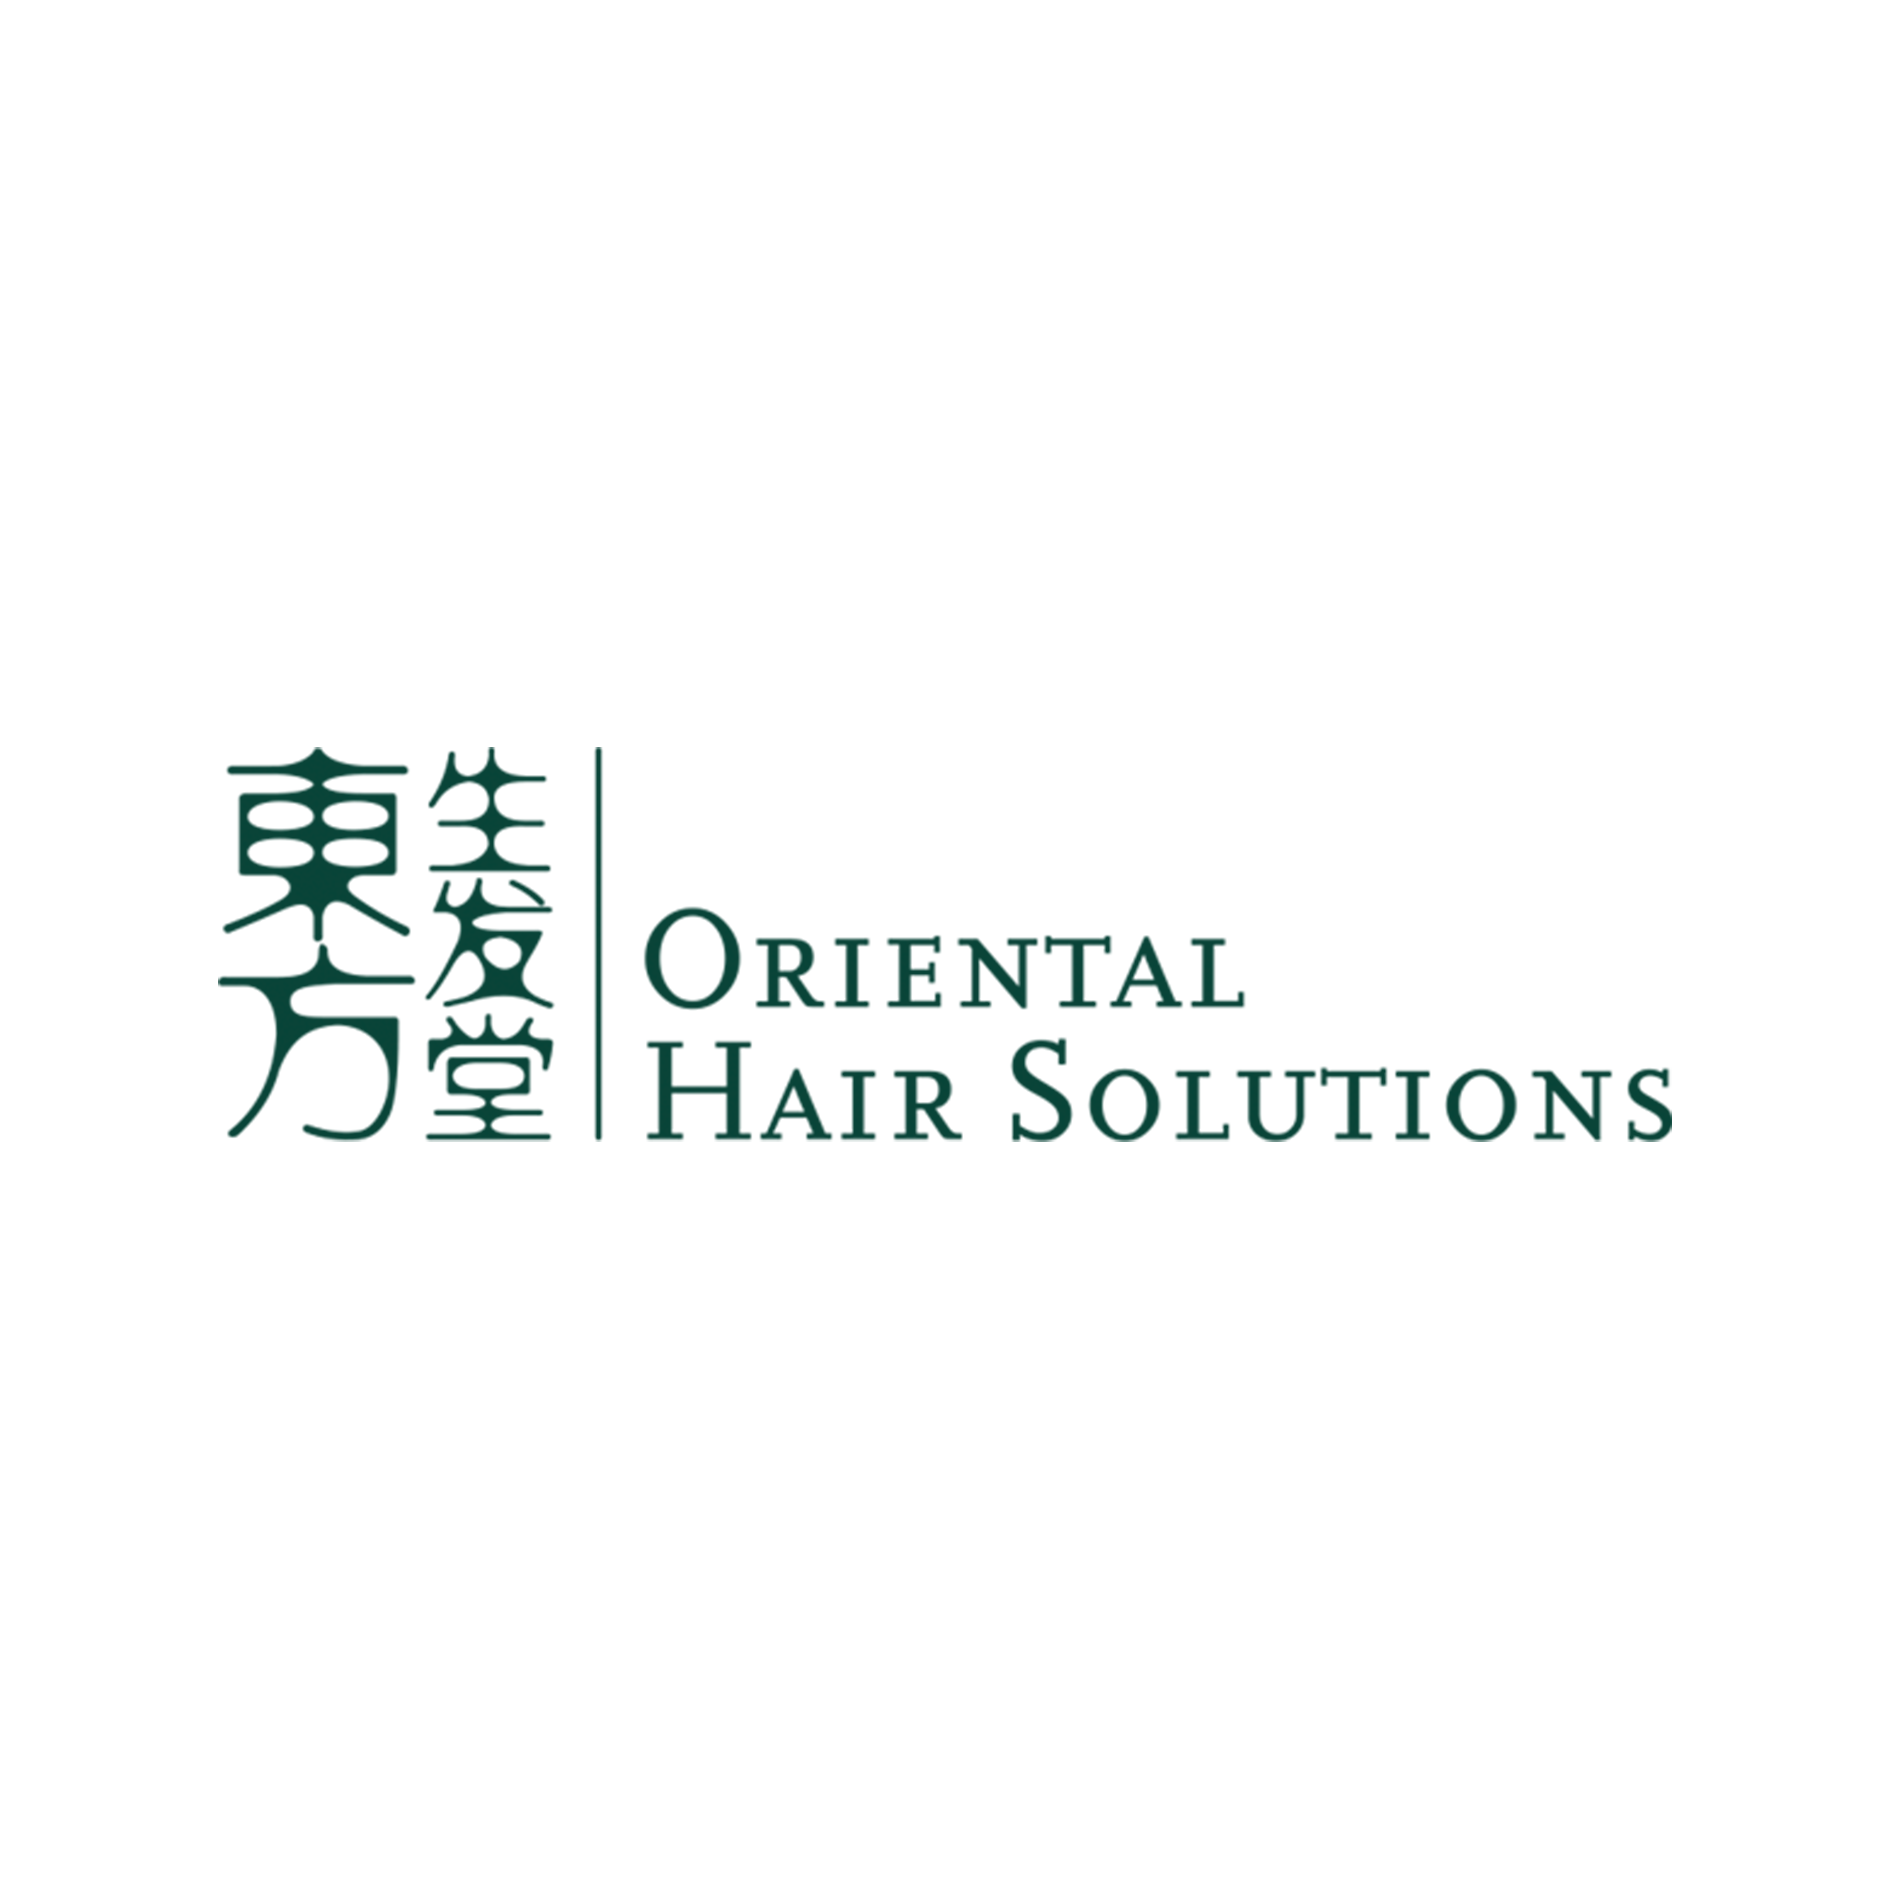 Deluxe Scalp Spa Therapy with 20 mins Head & Shoulder Massage + Hair Growth Tonic (1 Session) at Oriental Hair Solutions - Get Deals, Cashback and Rewards with ShopBack GO